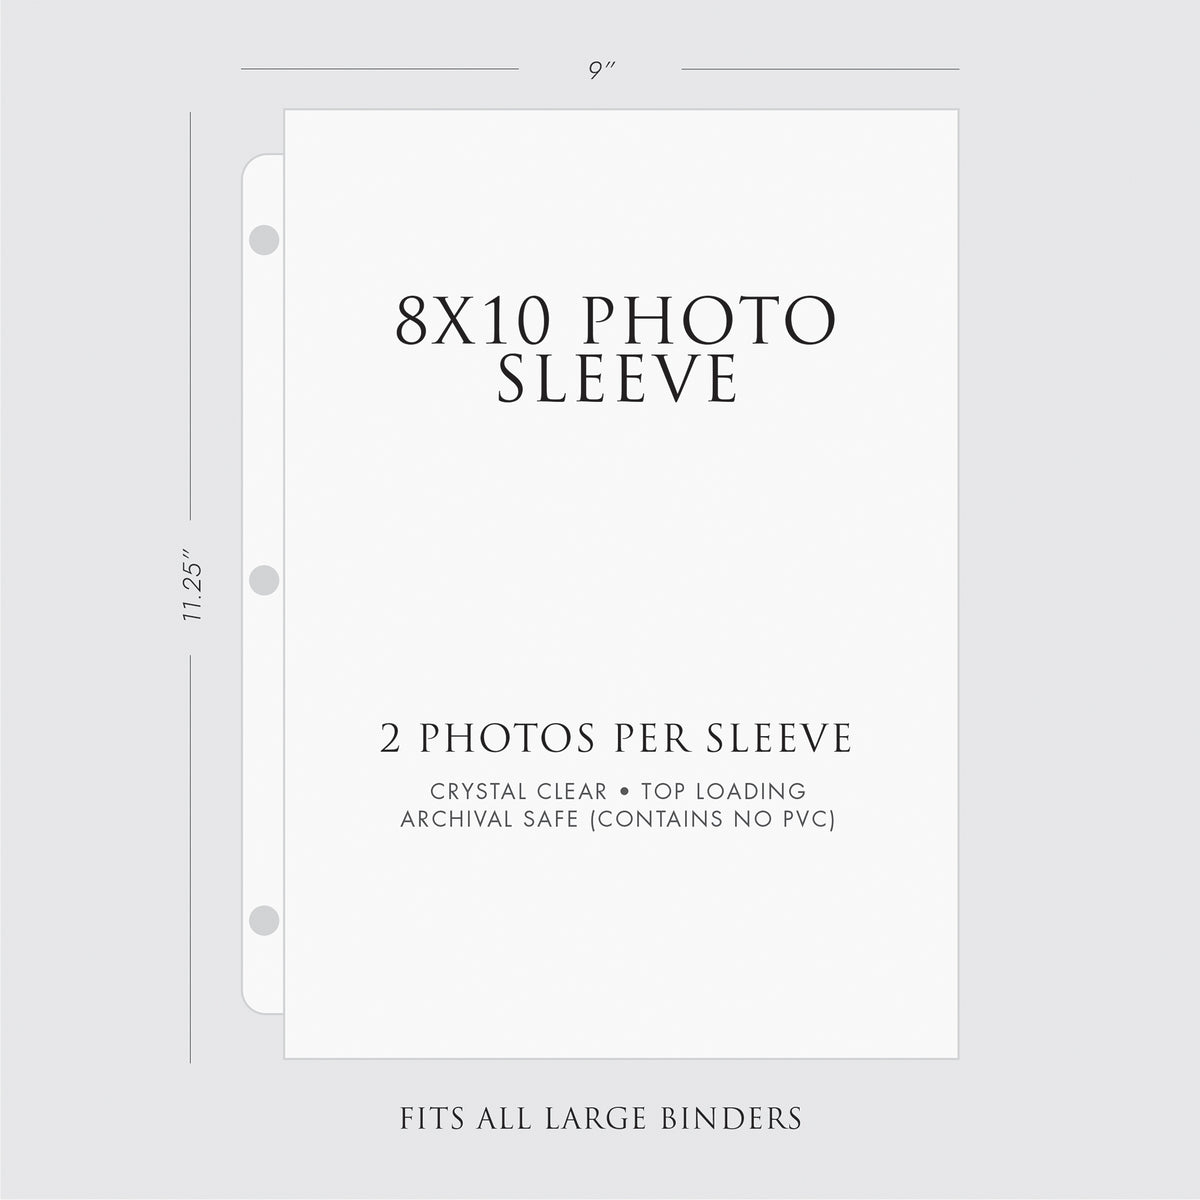 Large Photo Binder | for 8x10 Photos | with Teal Blue Silk Cover